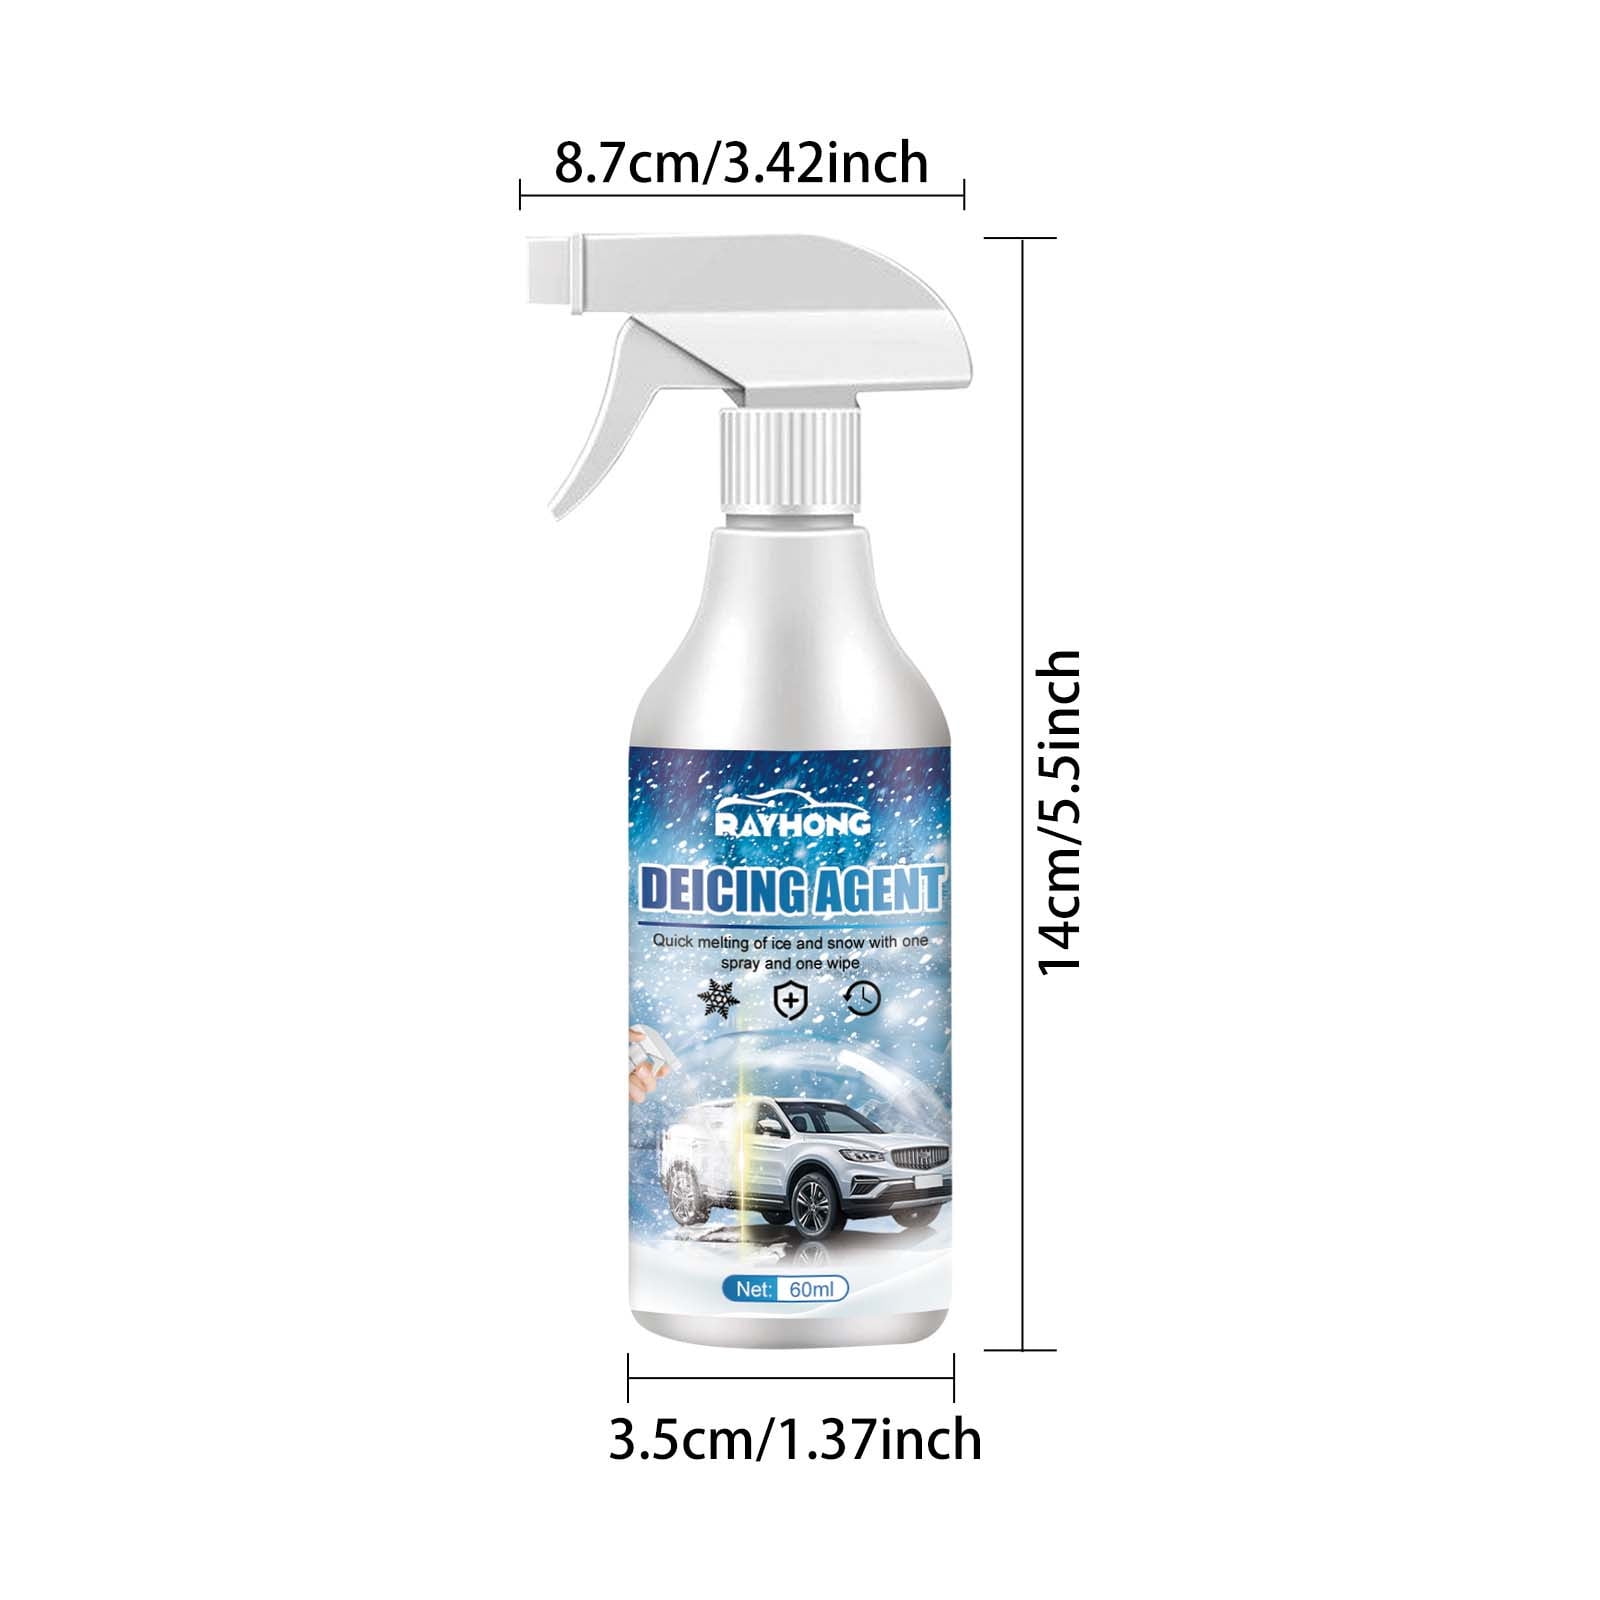 Windshield Deicing Spray Defrosting Antifreeze High Concentration Fast  Melting of Ice and Snow for Car Windshield Windows Wipers and Mirrors 60ml  